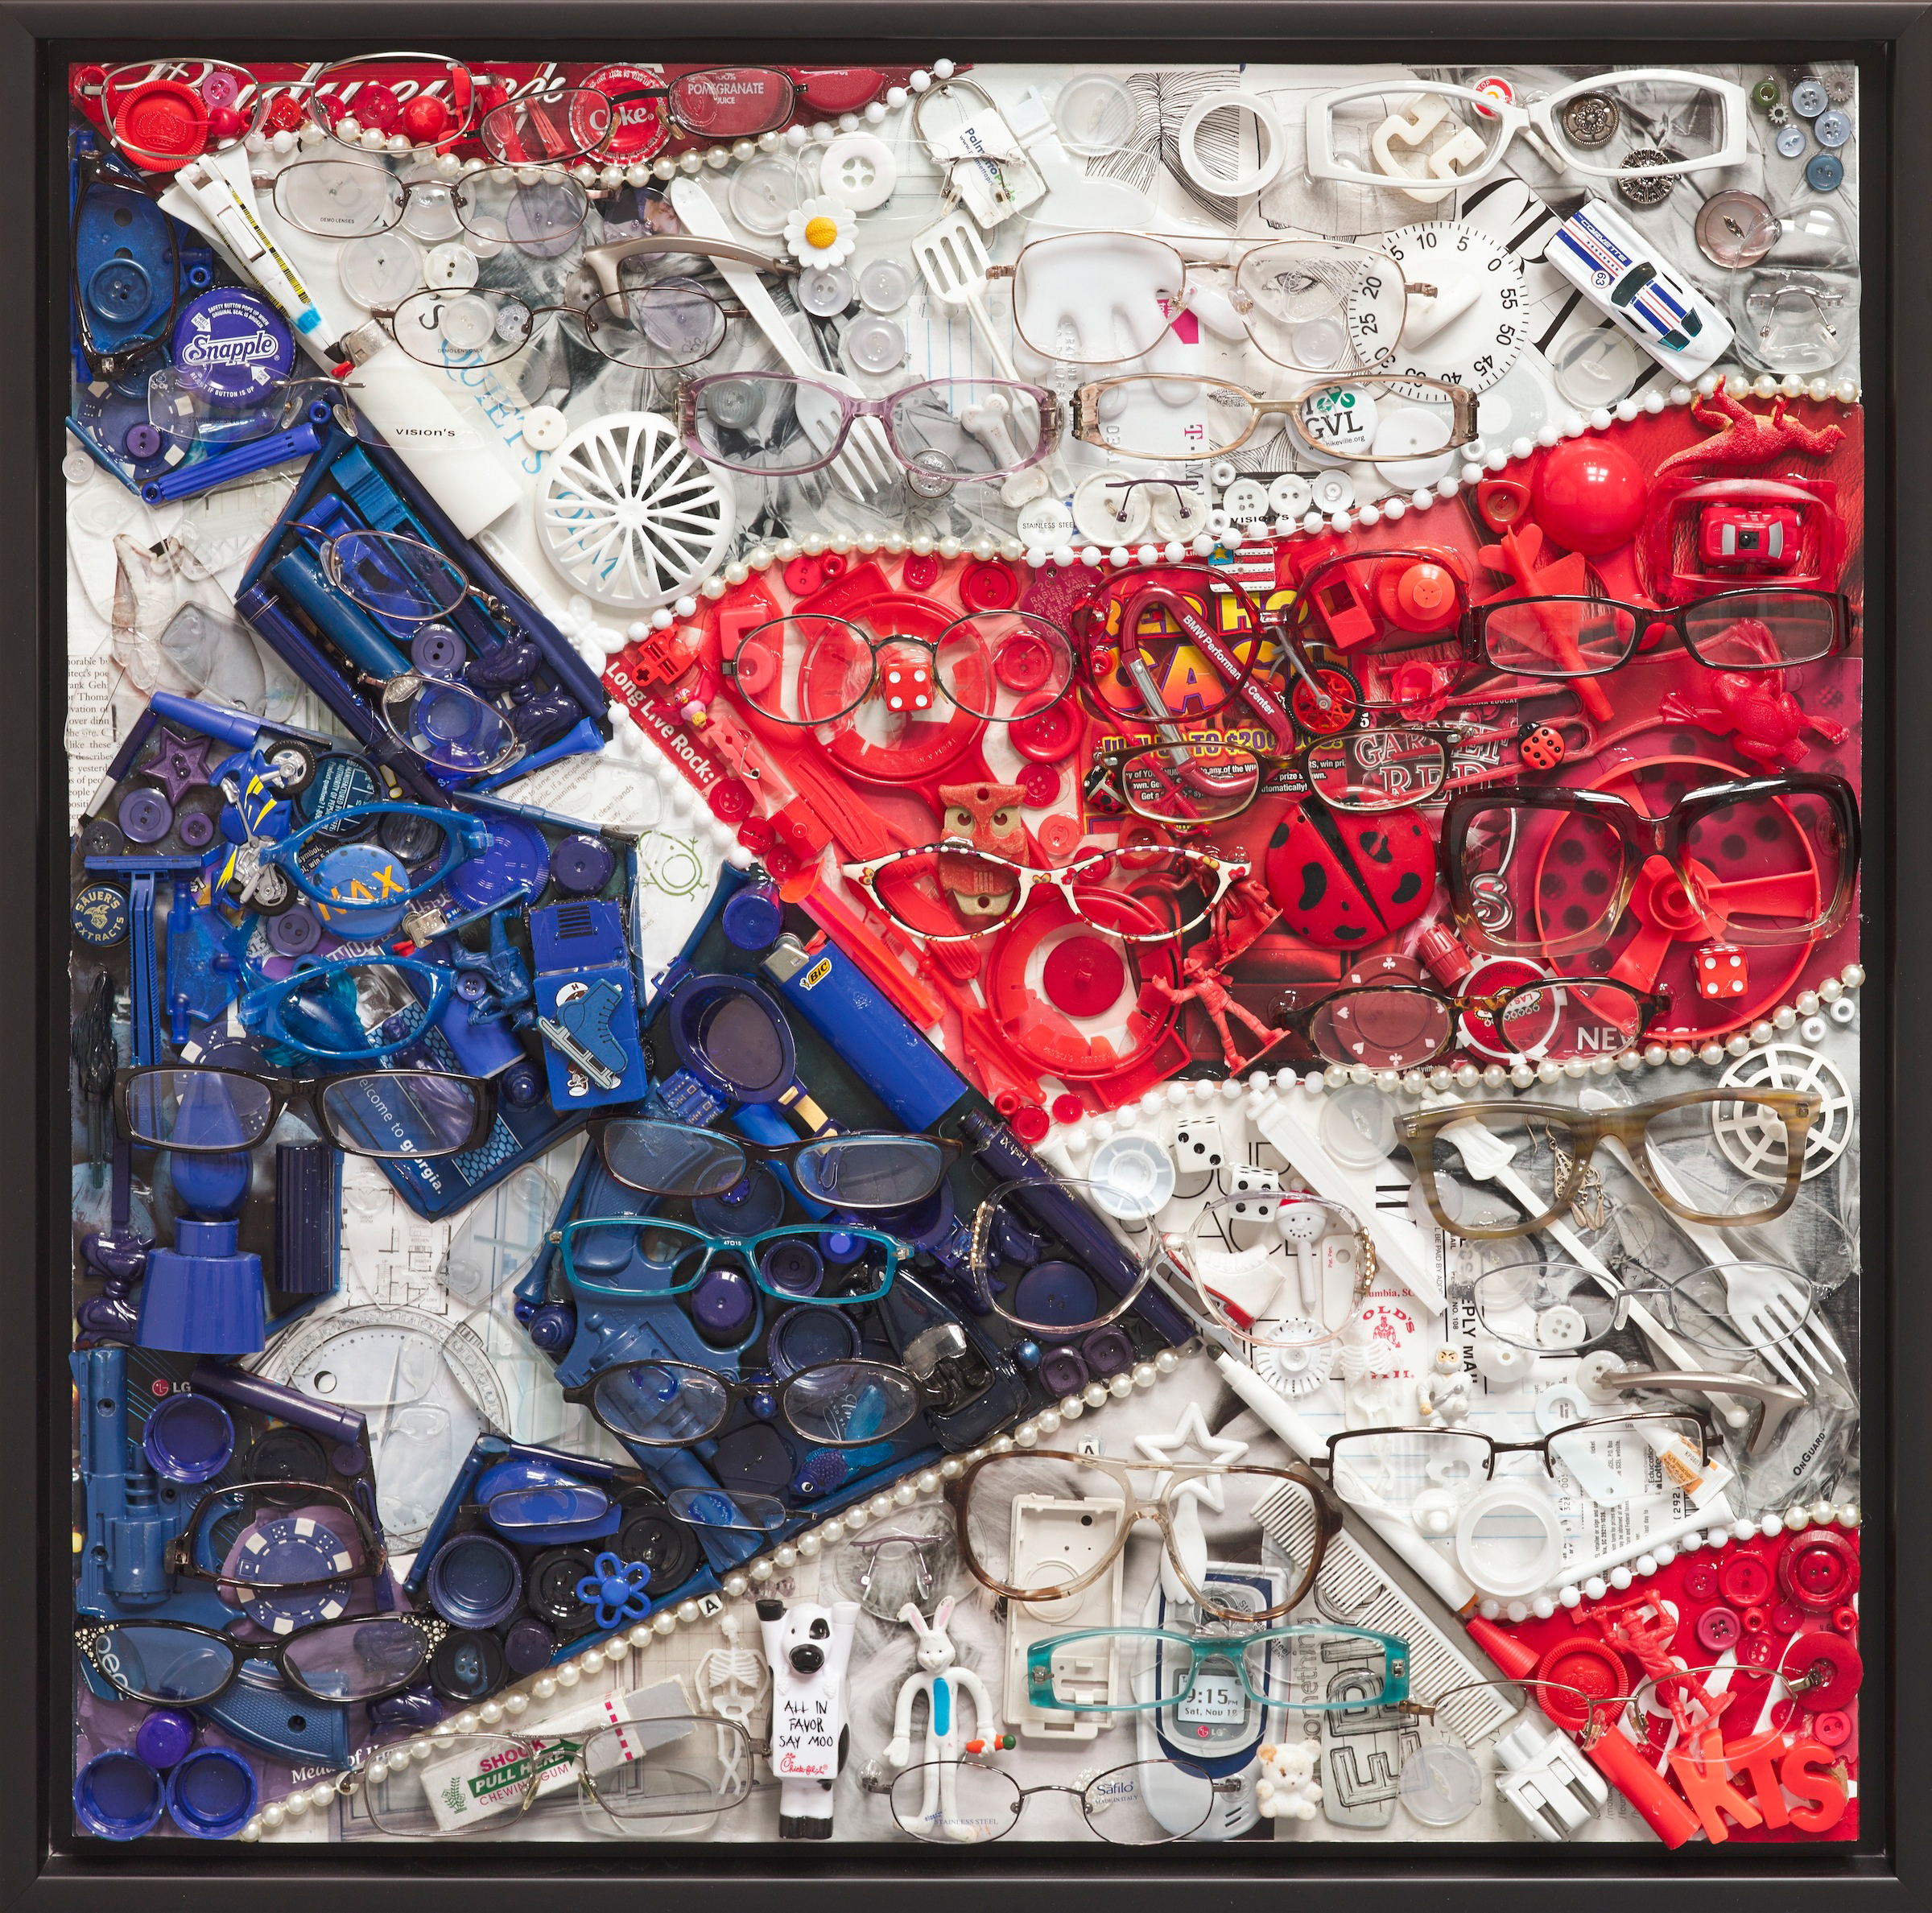 Vision for America, 2013. Unwanted eyewear collected from the public during one month at a local eyewear store served as the basis for this piece.